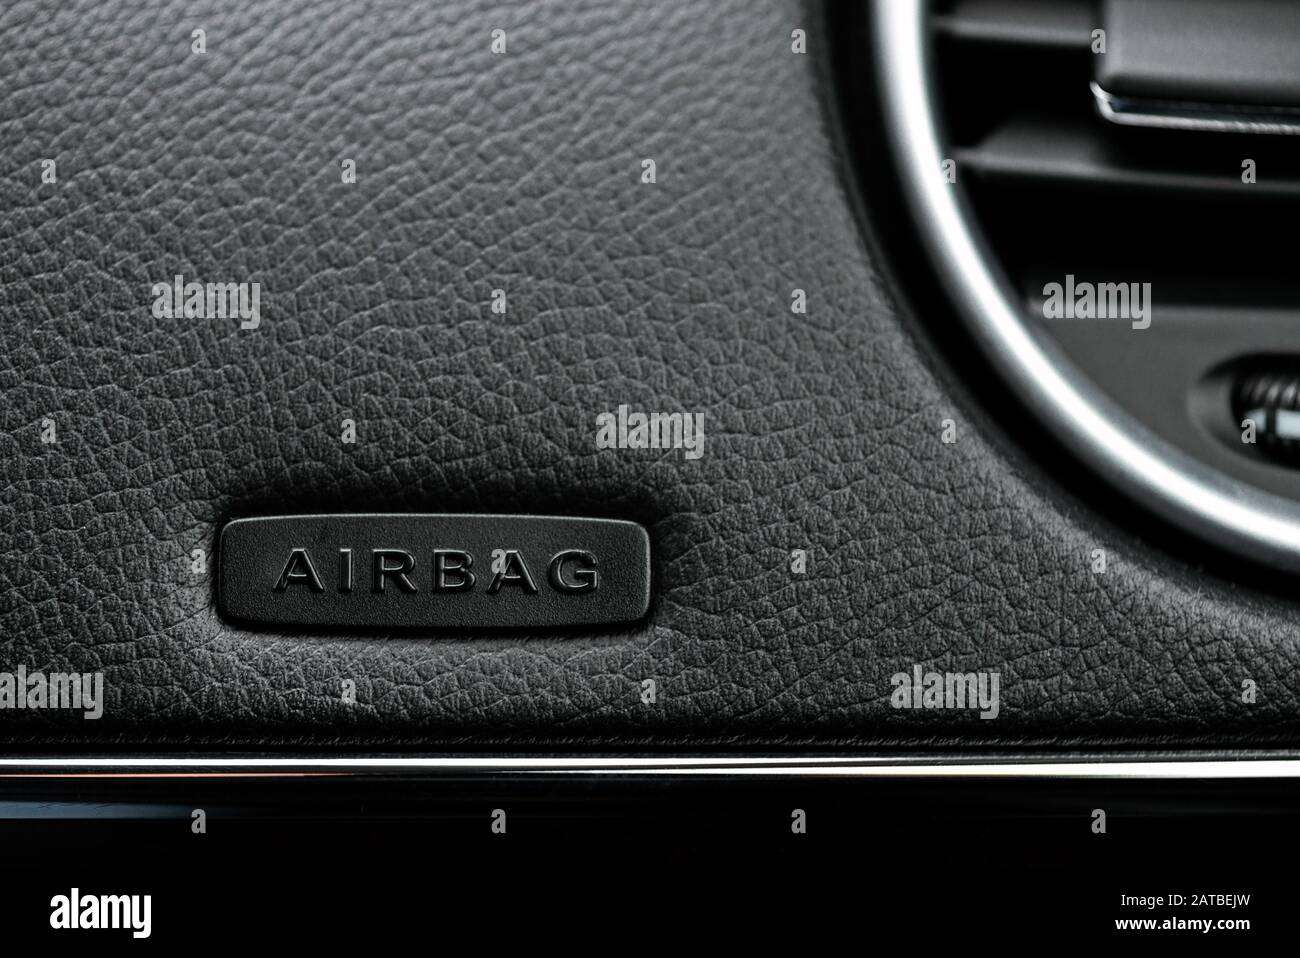 Close up image of the airbag  on the steering wheel of a car.- Image Stock Photo